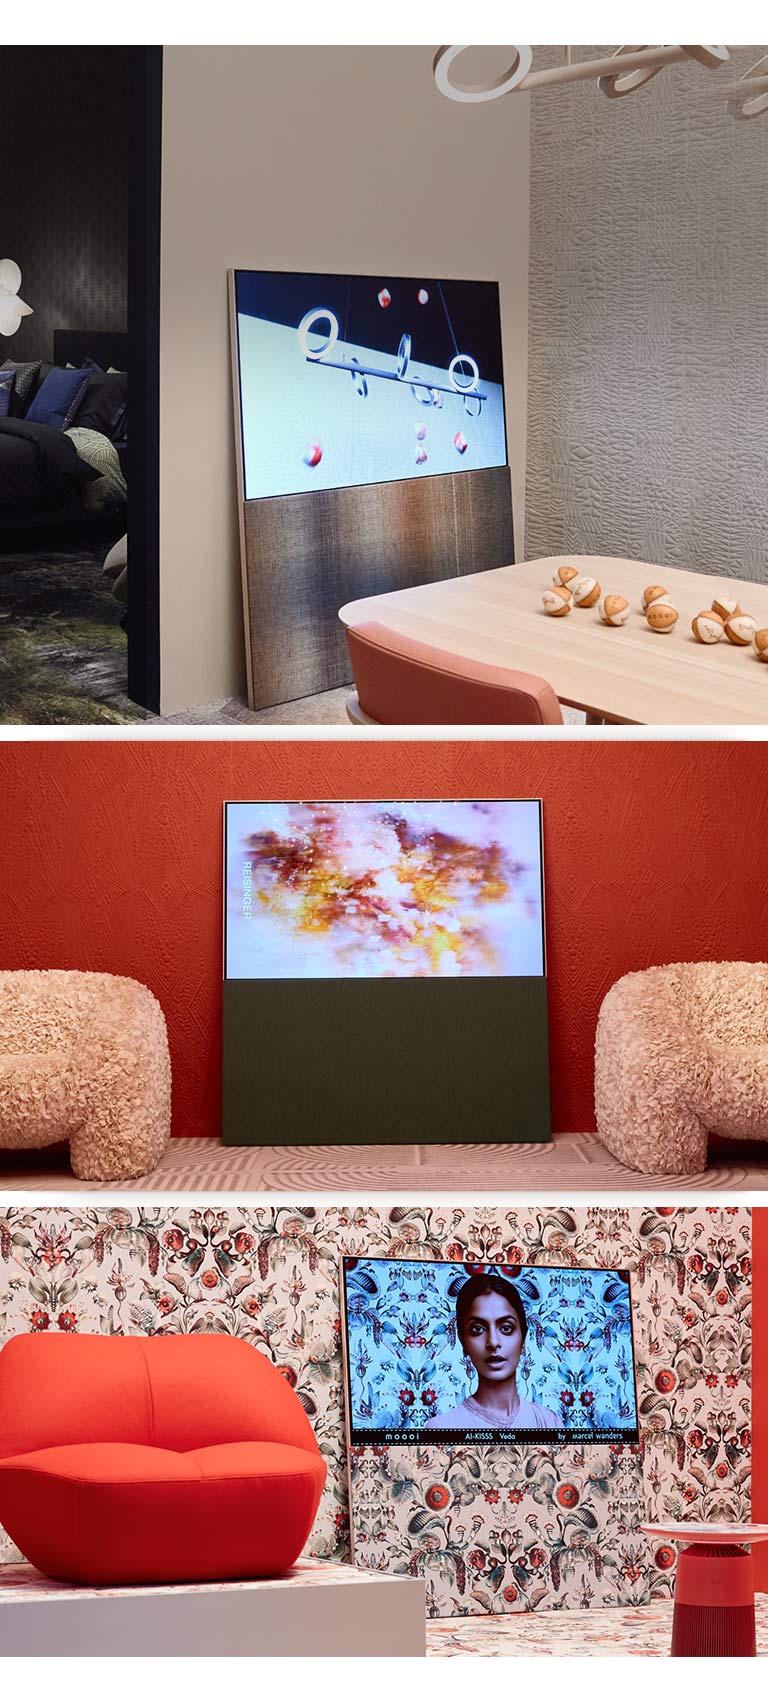 The top image shows Easel leaning against a wall in a neutral-colored room showing an abstract artwork featuring baseballs on the screen. Across from the TV sits a wooden table that also has baseballs on it. 	 The bottom right image shows Easel leaning against a bright floral patterned wall with a red and green color scheme. A picture of a woman against the same background as the surrounding wall is on the screen. The fabric textured stand also has the same pattern. Beside the TV, there is a red one-person sofa. The bottom left image shows Easel leaning against a textured terracotta-colored wall. An abstract red, orange, and purple image fills the screen. On either side of the TV, there are beige, textured one-person sofas.